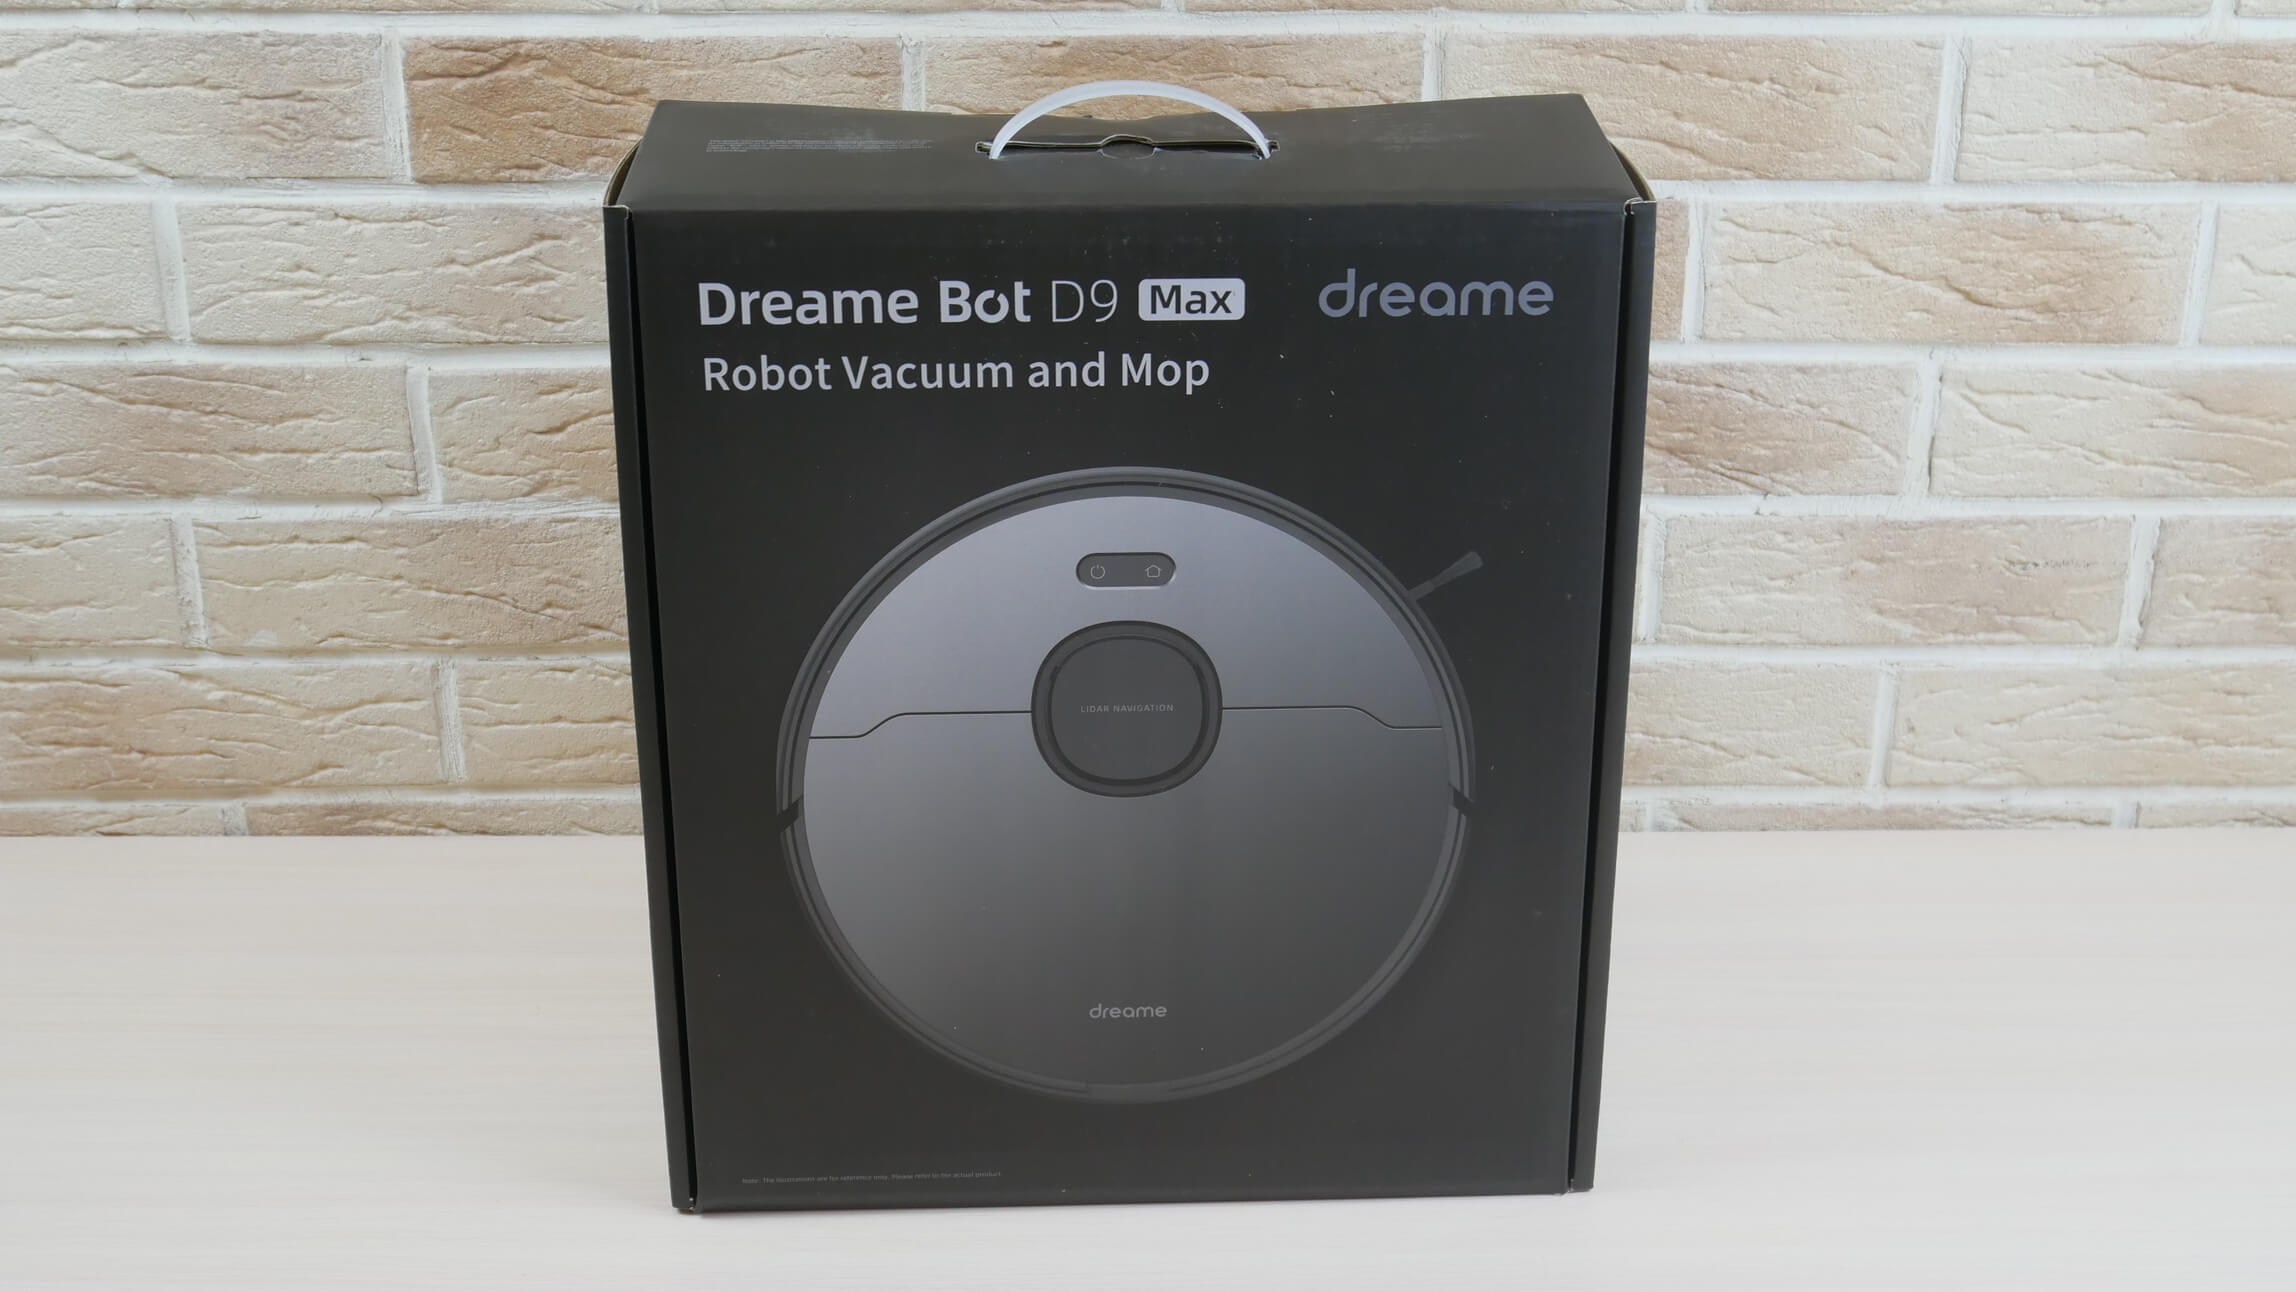 The ULTIMATE Robot Vacuum?  Dreame Bot D9 Max - Unboxing & Review 